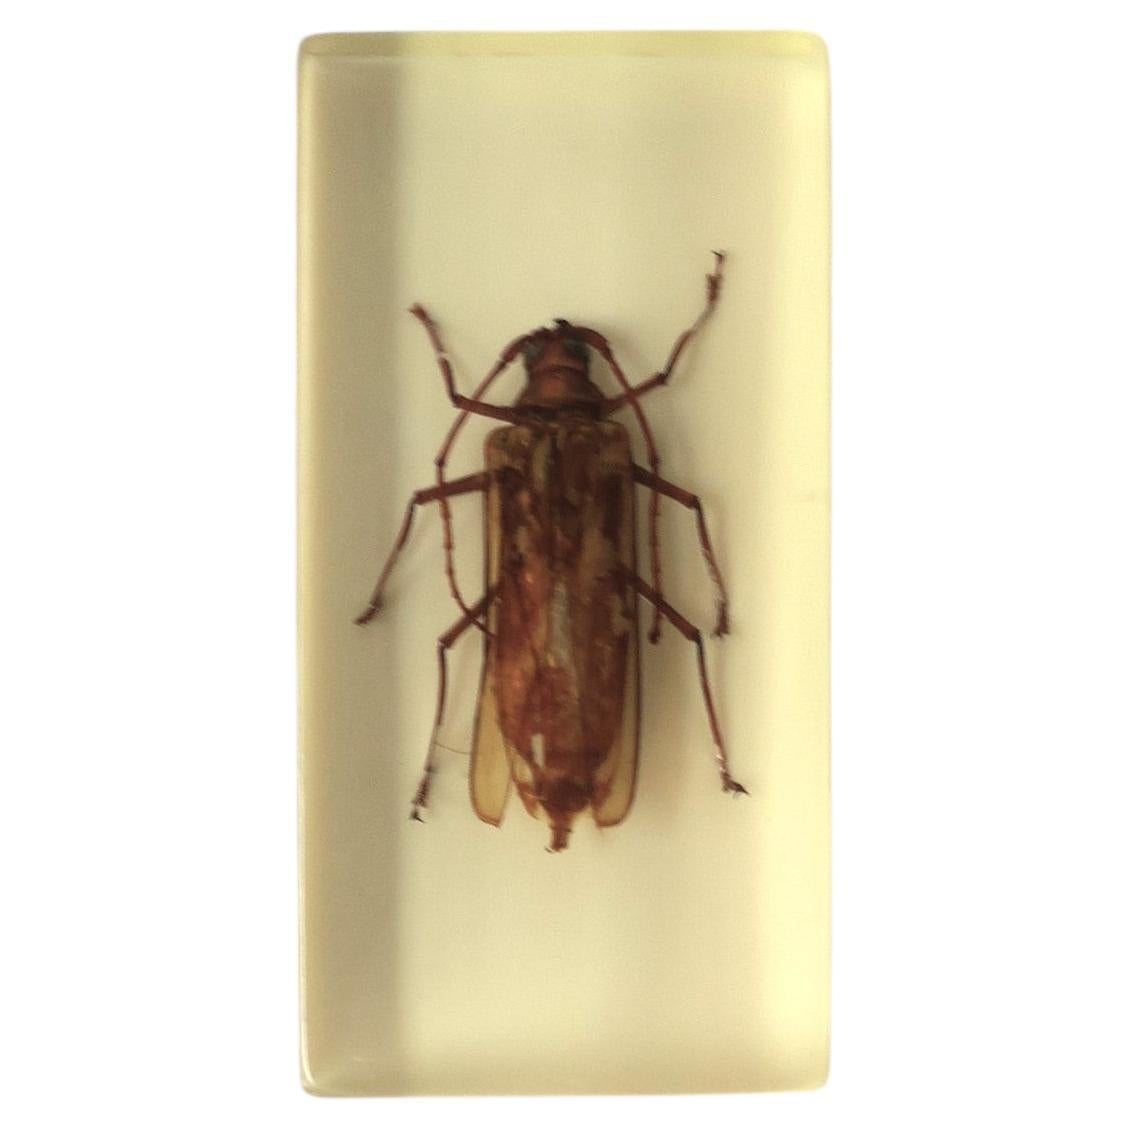 Lucite Encased Insect Bug Decorative Object or Paperweight